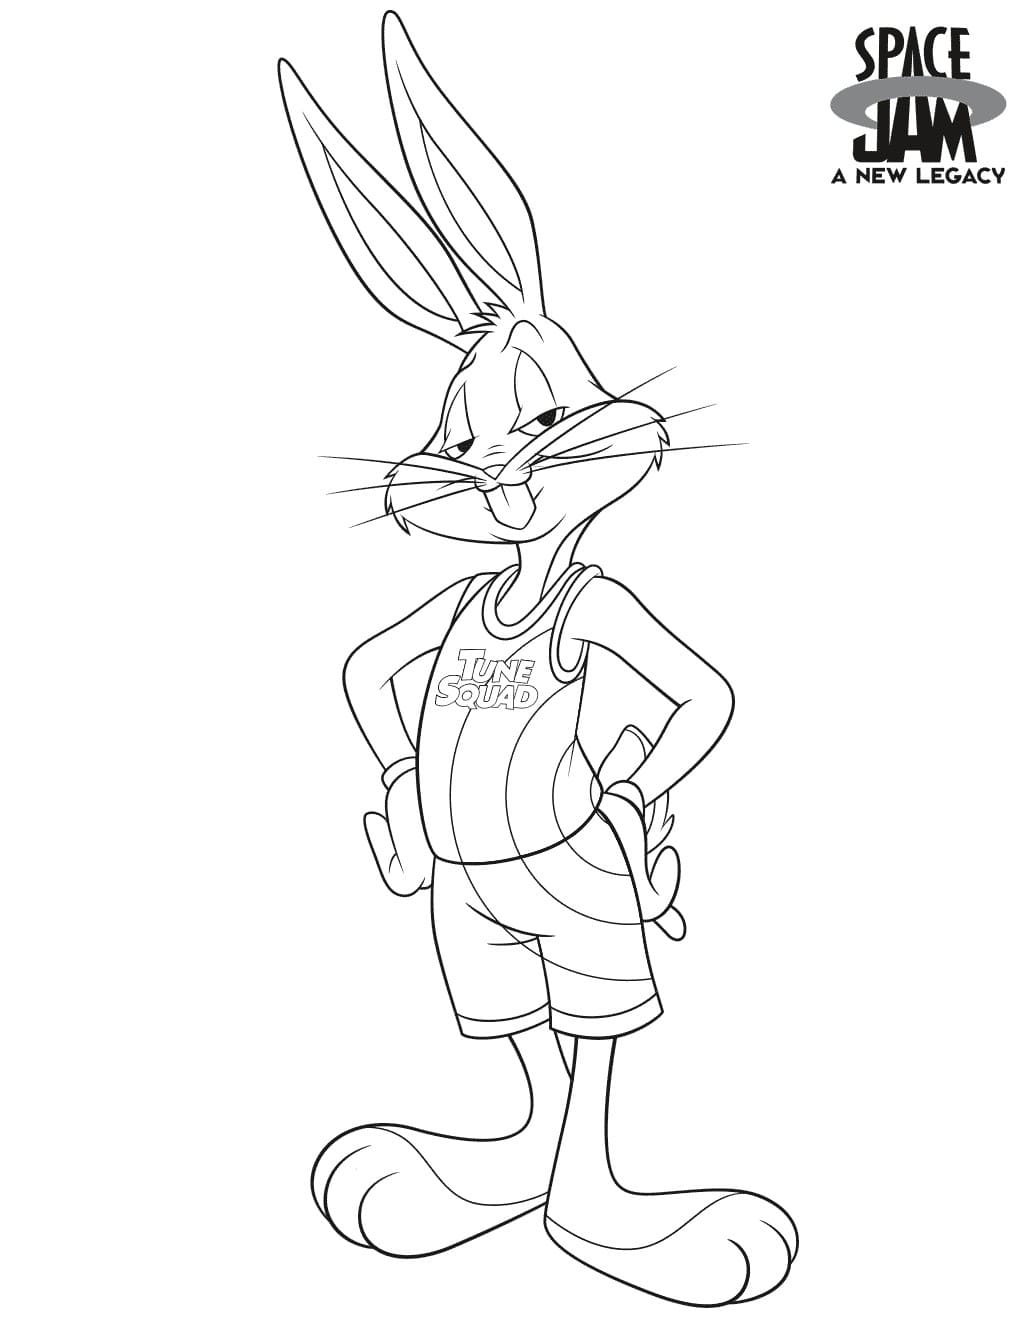 Space Jam A New Legacy coloring pages   WONDER DAY — Coloring ...